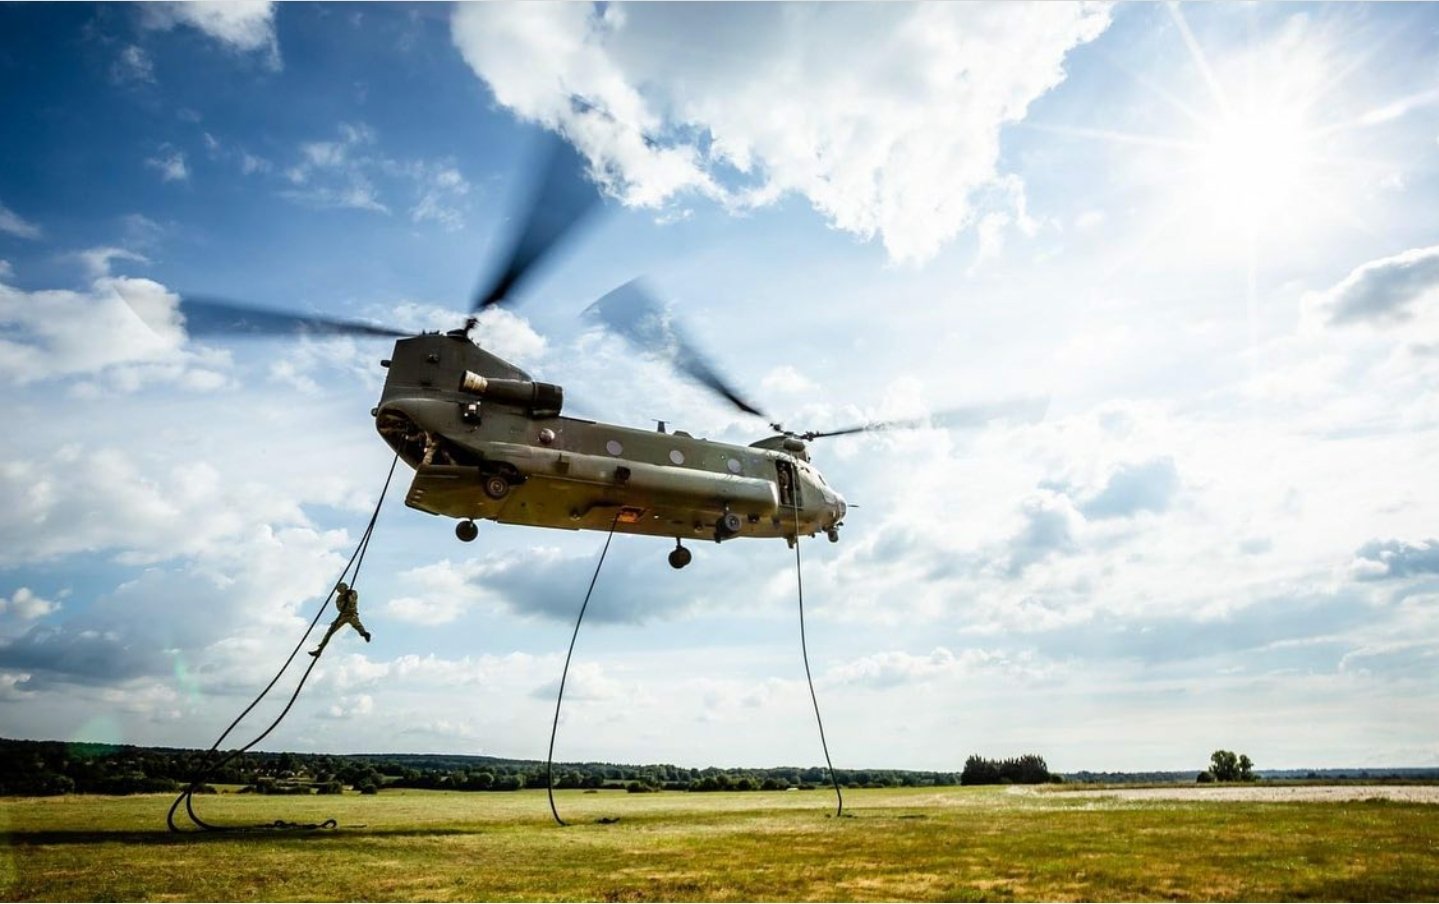 RAF_Luton Of The Day: Special Army Soldiers Fast Rope From An H22 Osprey Heli Plane At #RAFLuton. Fast Roping Is The Use Of A Rope To Get On The Ground